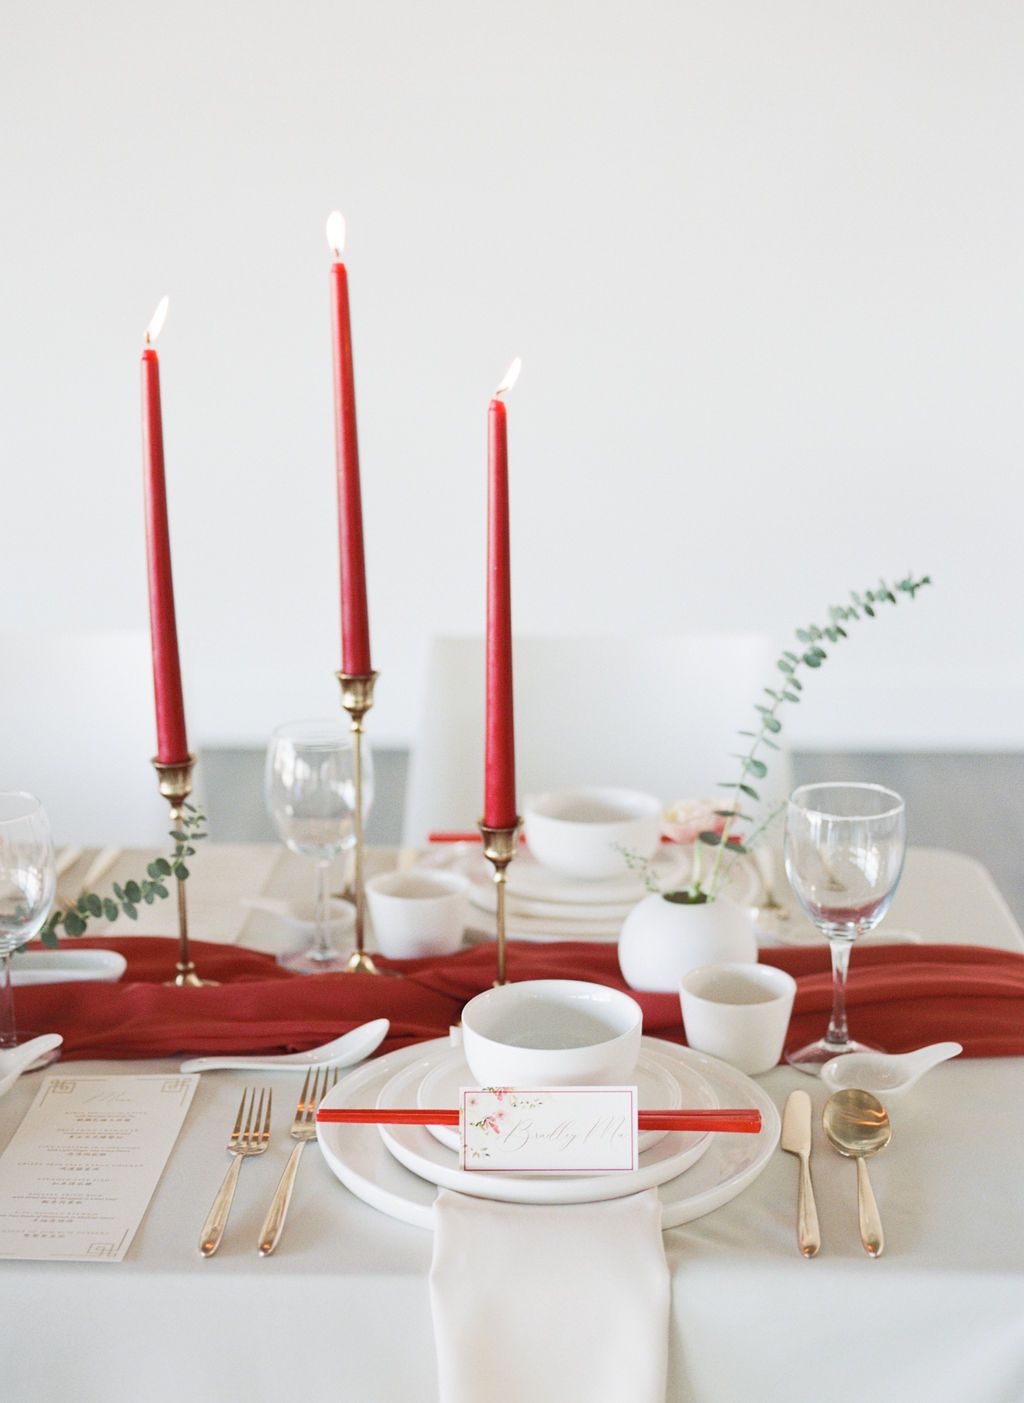 Modern Wedding Table Design in Vancouver BC, with Asian inspired place settings, taper candles in a bold red accent, and modern decor elements.